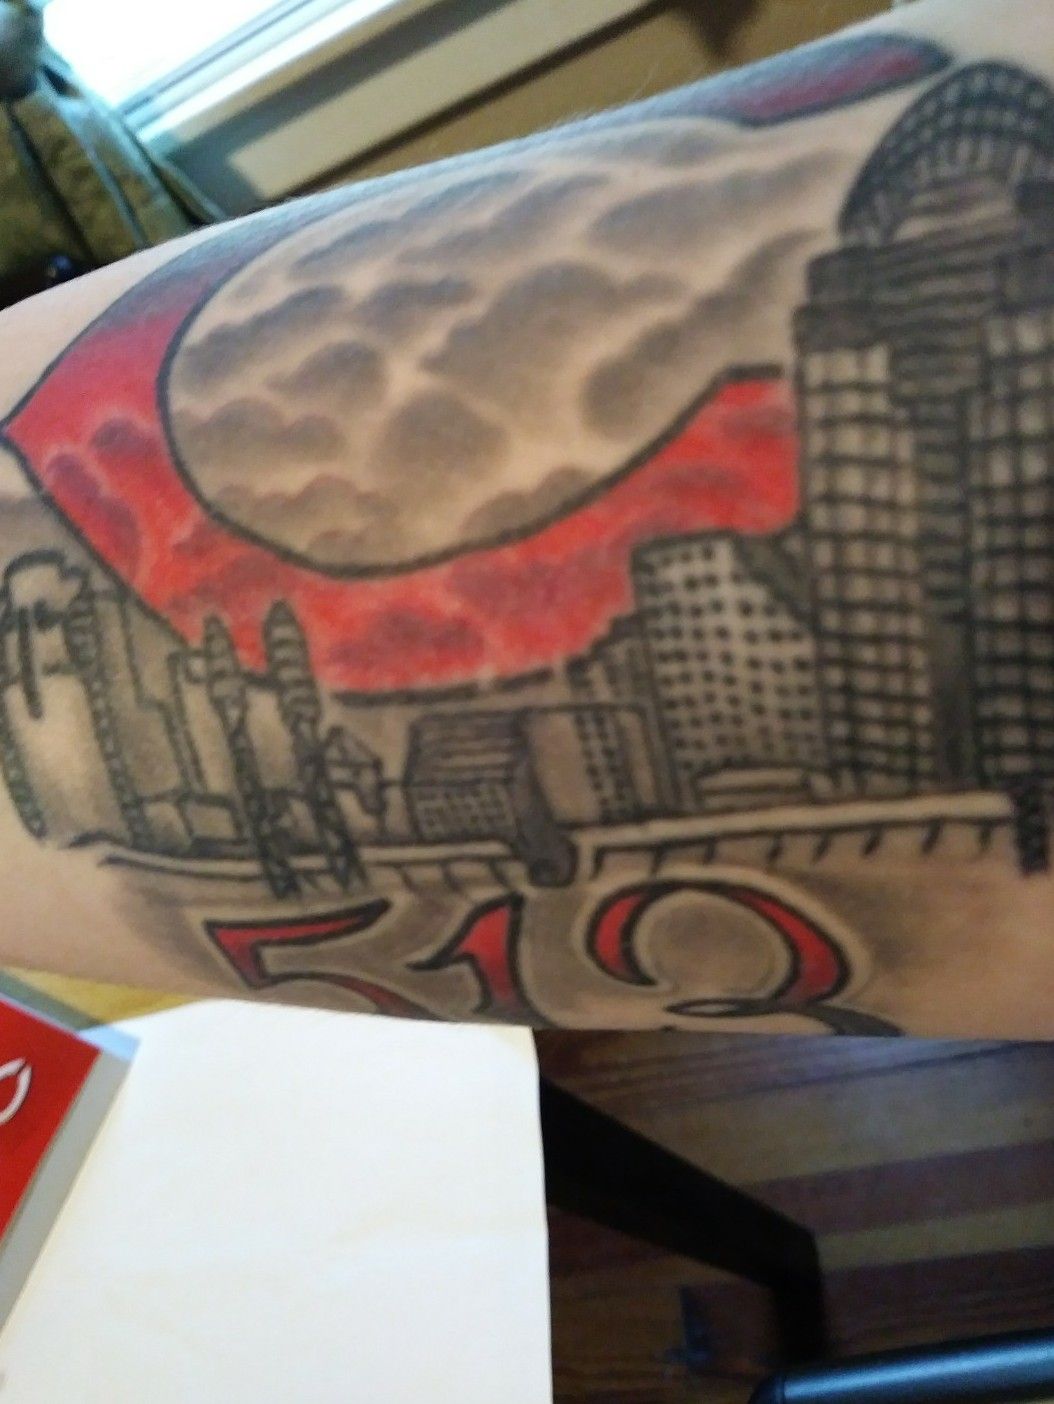 Reds Rally Pack on Twitter AWESOME RT lisabraun RT HEAD7 Reds  RedsWinItFirst my buddy Brents tattoo httptcoXuibho5mkn  Now THIS  is a serious Reds tattoo  Twitter